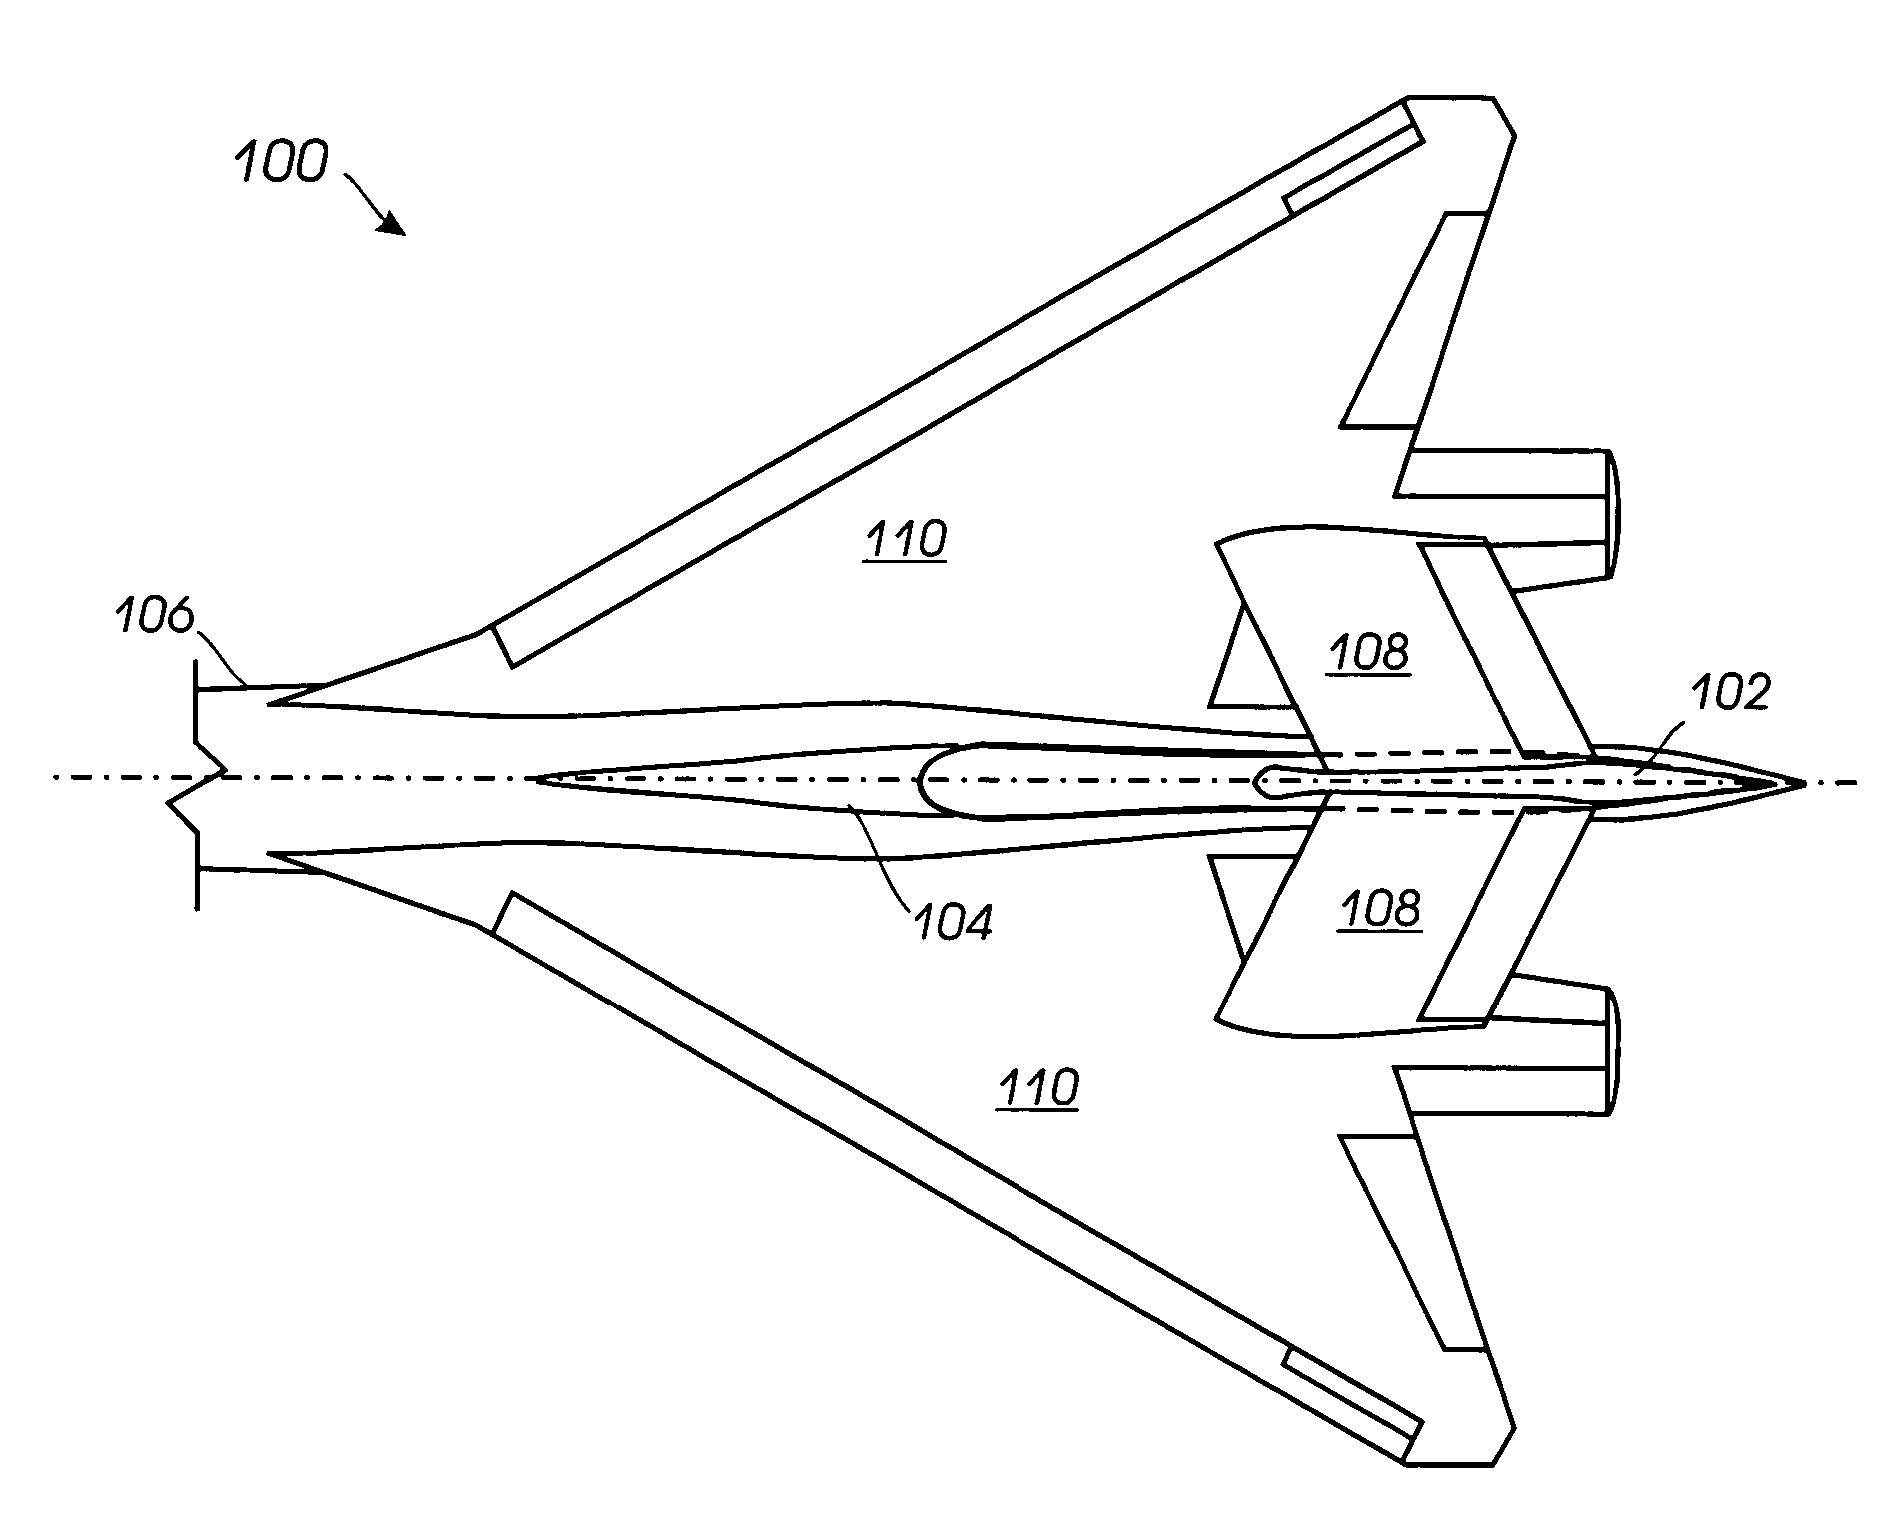 Area ruling for vertical stabilizers